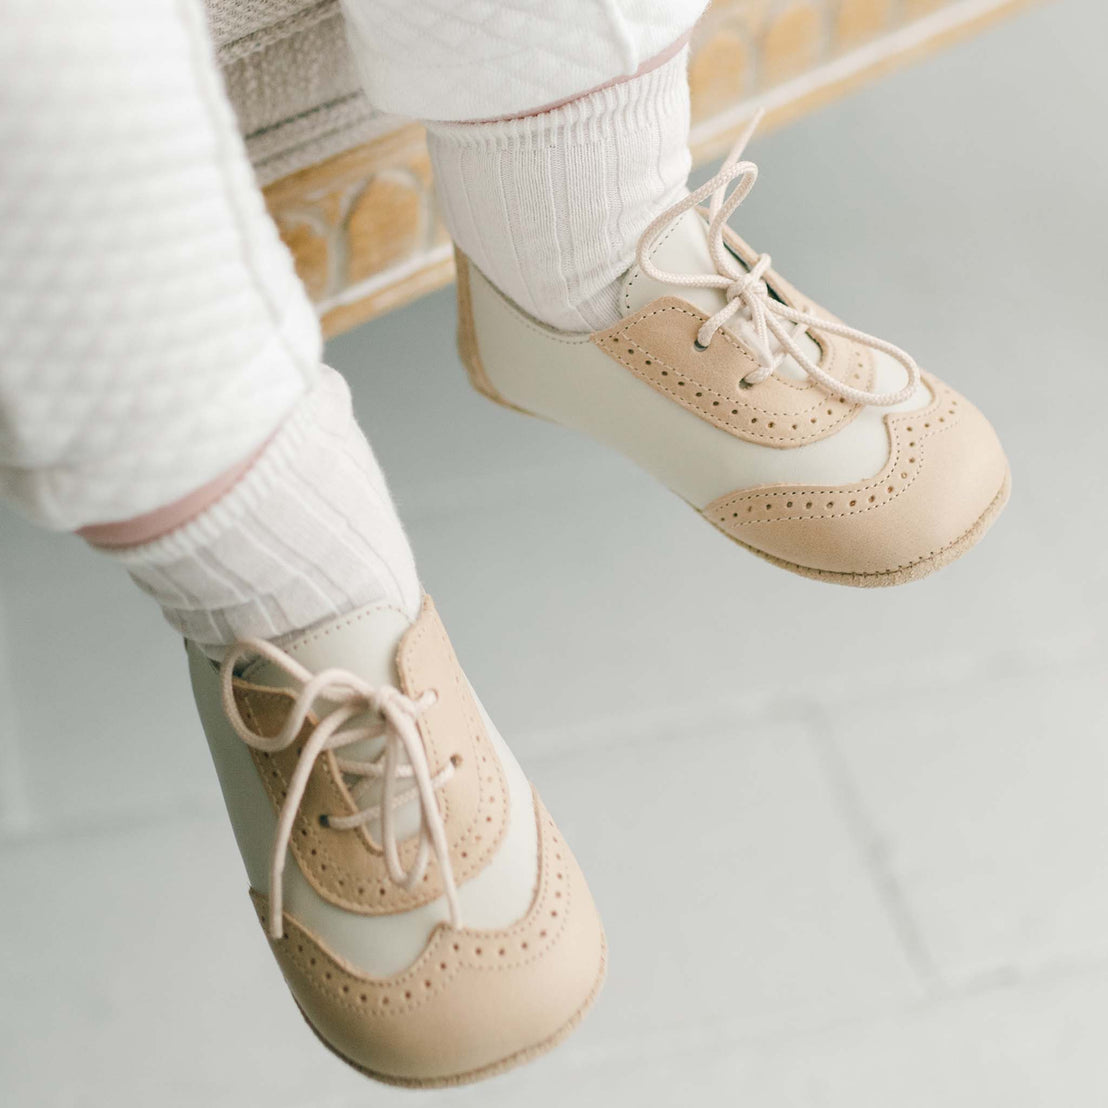 Baby wearing a pair of the Beige and Ivory Wingtip Shoes made with a tan and ivory matte leather with tan suede soles and detailed edging